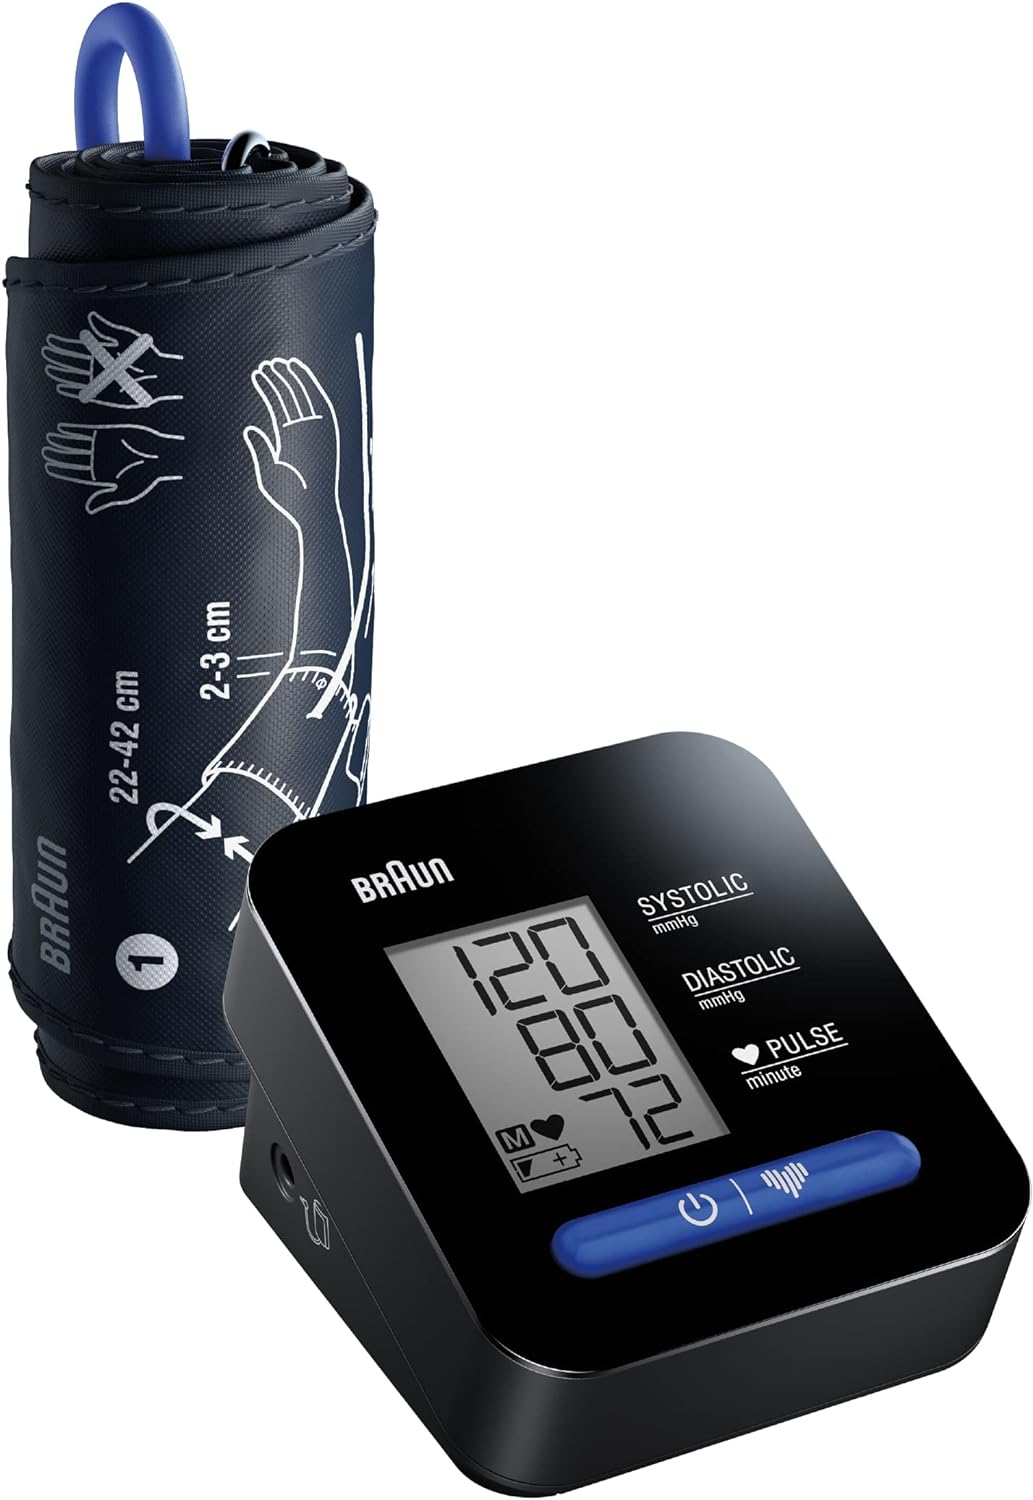 Braun ExactFit 1 Upper Arm Blood Pressure Monitor $17.39 + Free Shipping w/ Prime